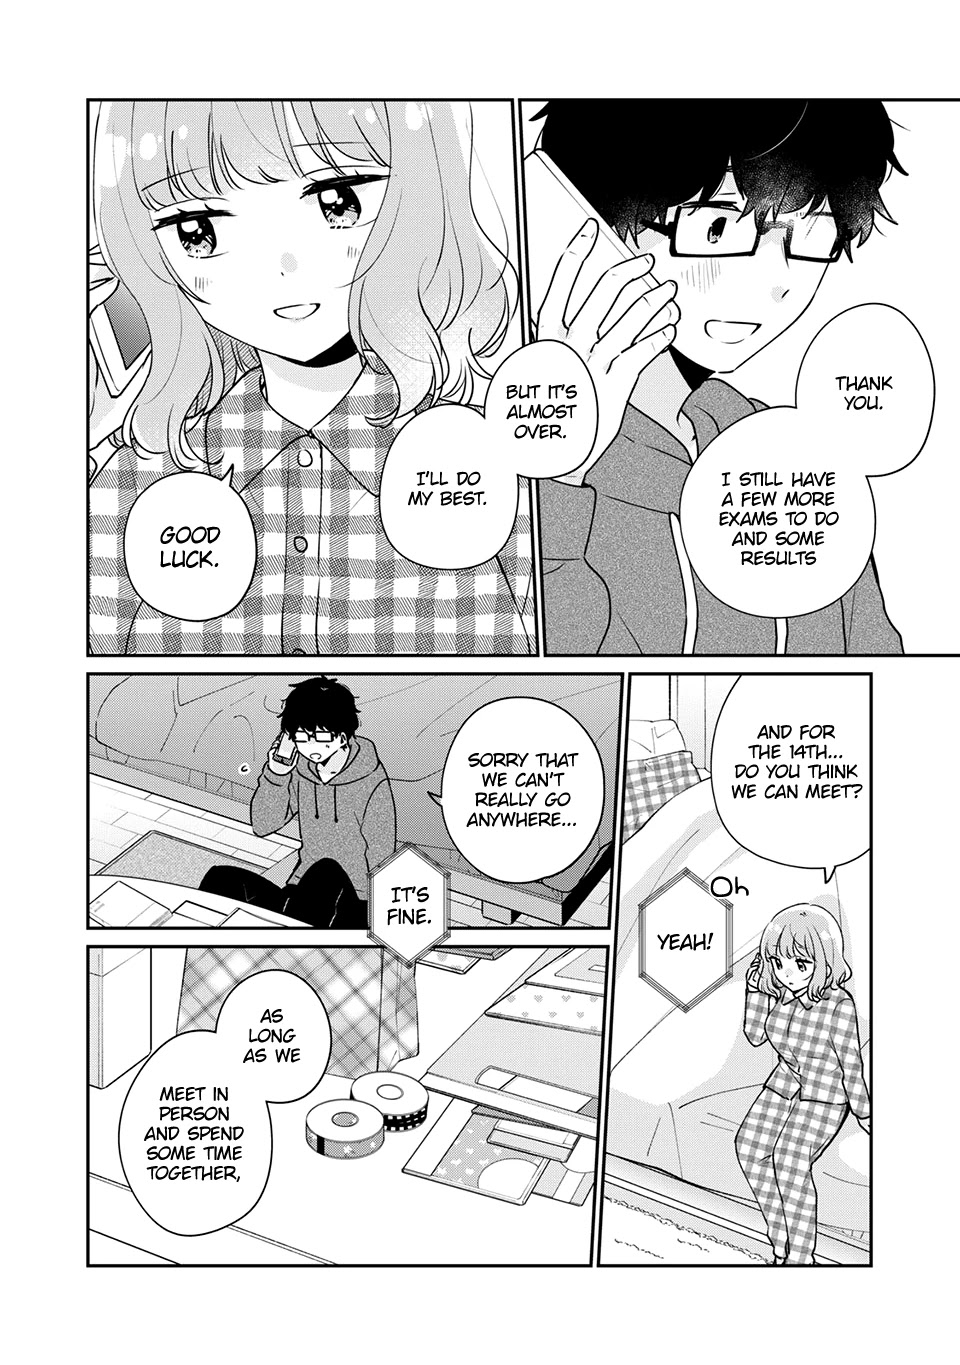 It's Not Meguro-San's First Time - Page 3